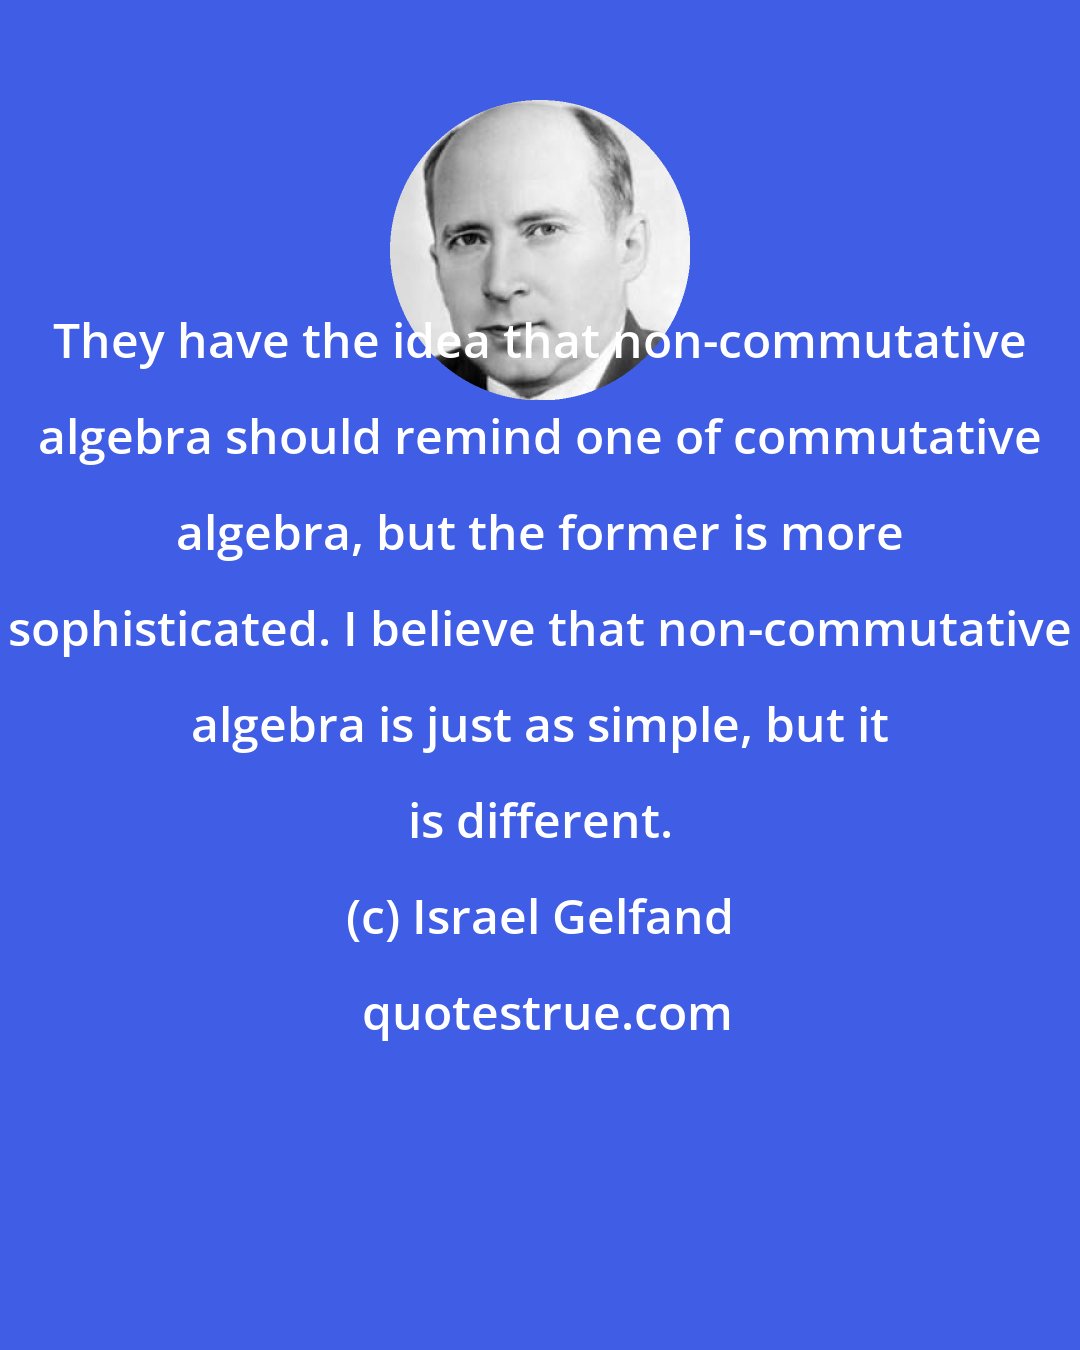 Israel Gelfand: They have the idea that non-commutative algebra should remind one of commutative algebra, but the former is more sophisticated. I believe that non-commutative algebra is just as simple, but it is different.